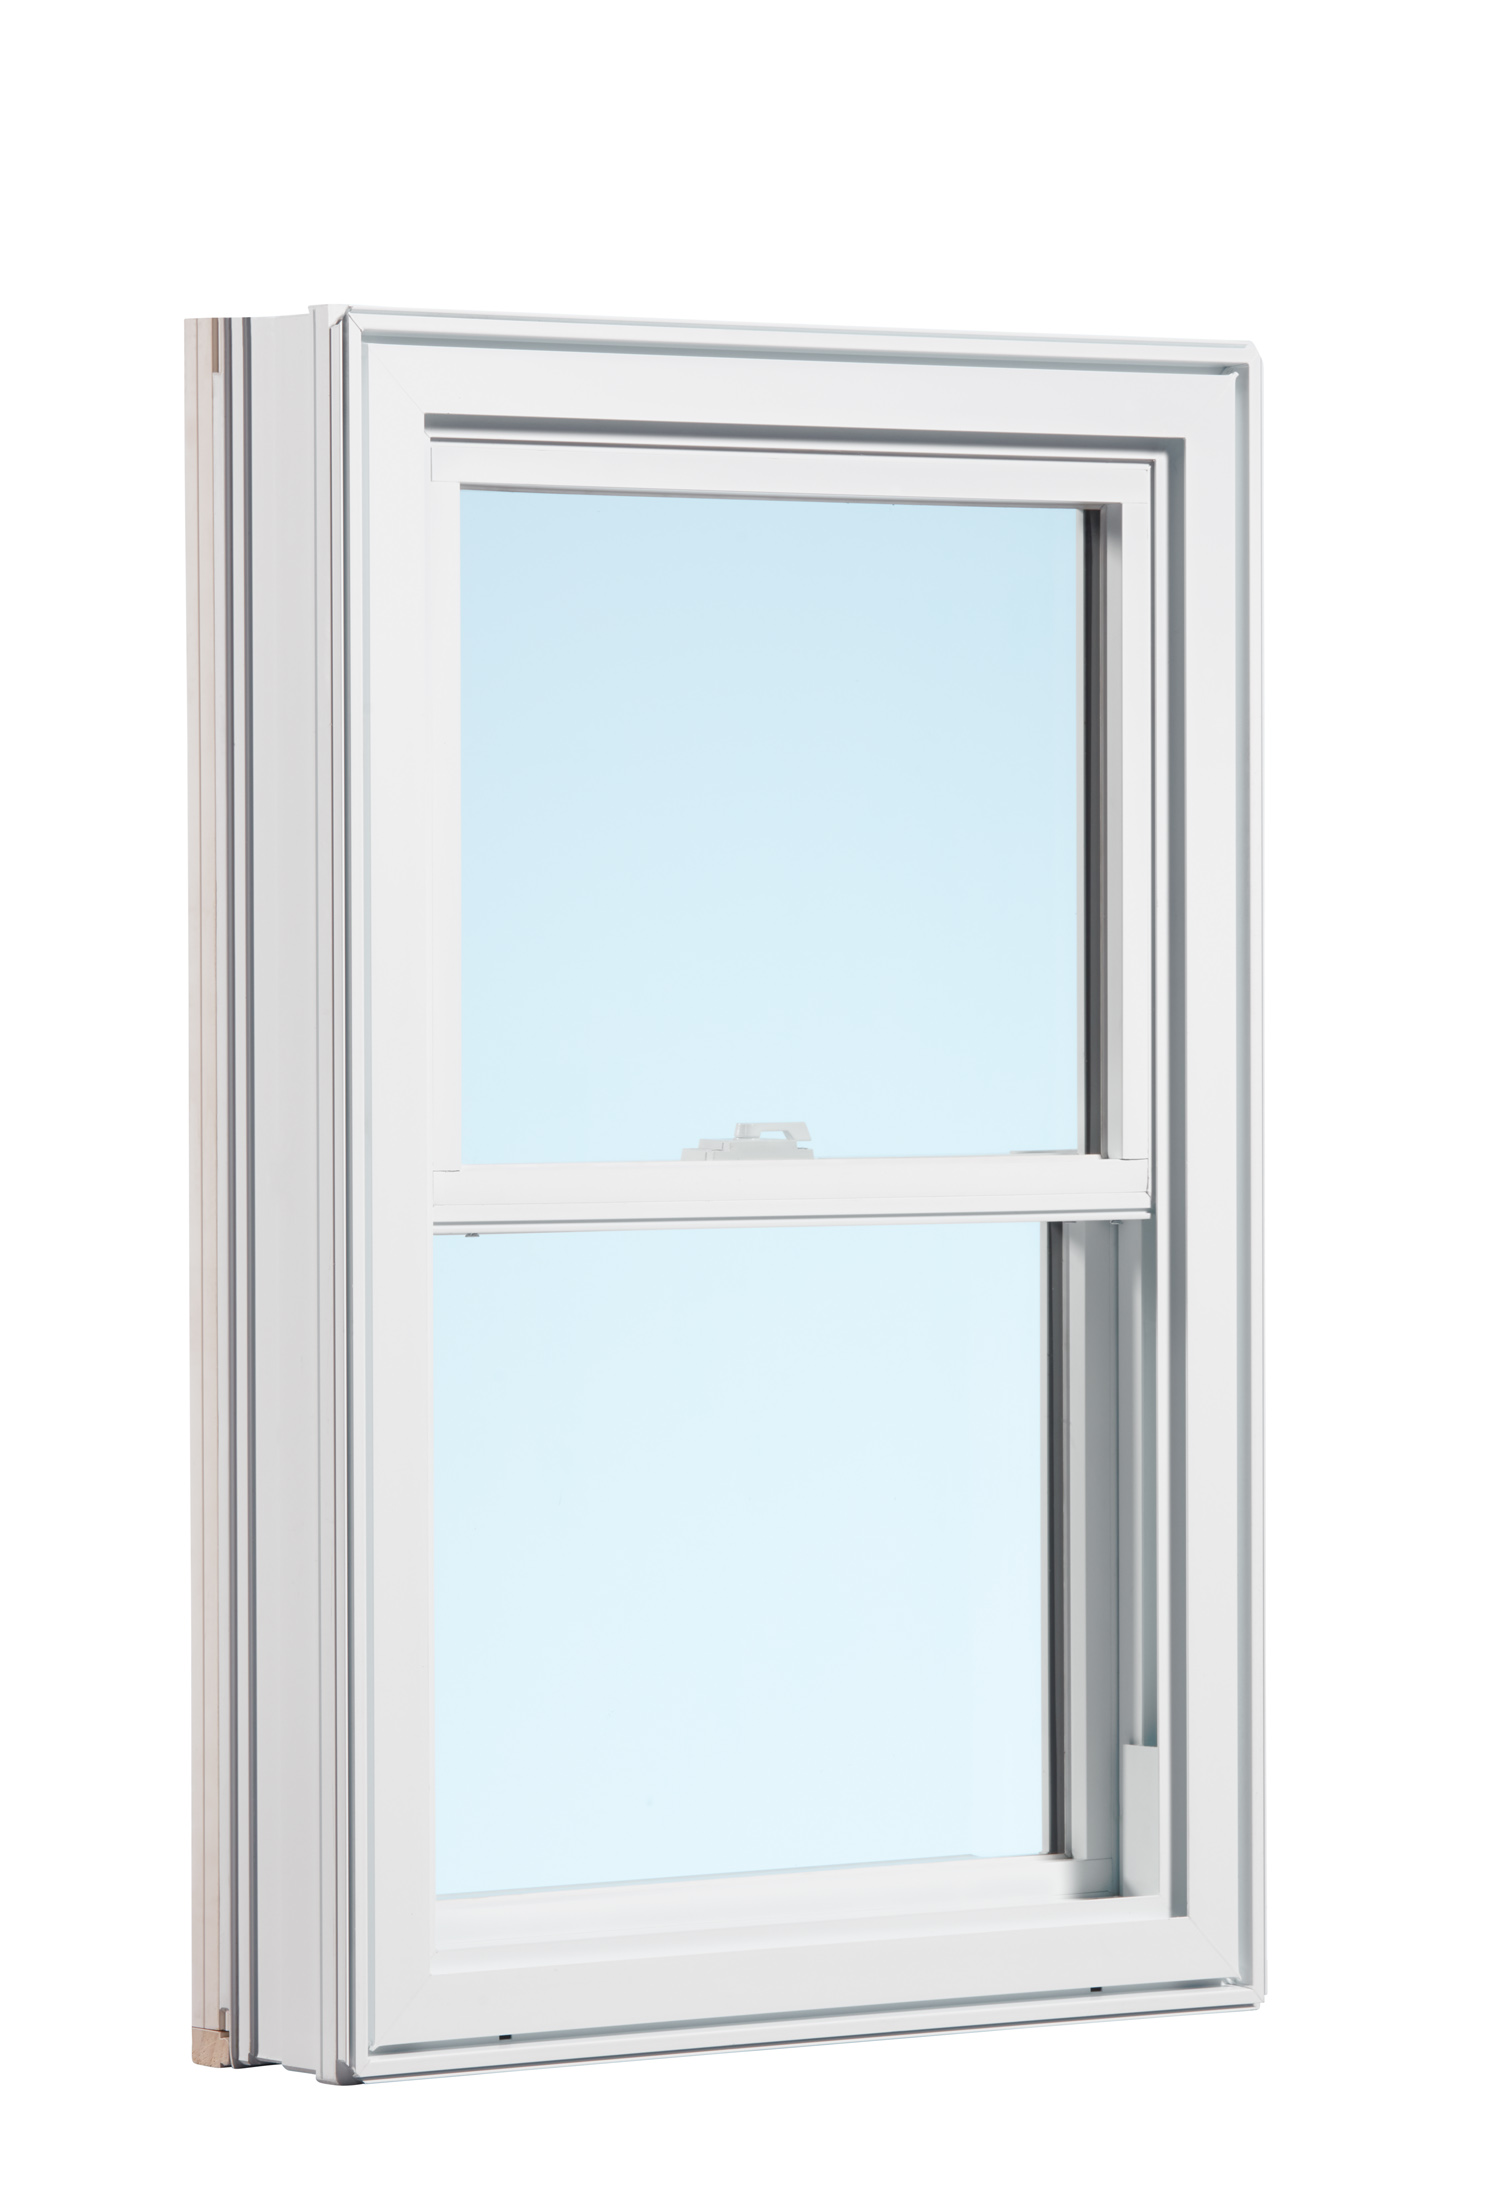 goldenvinyl®-1000-series-double-hung-window-img-3